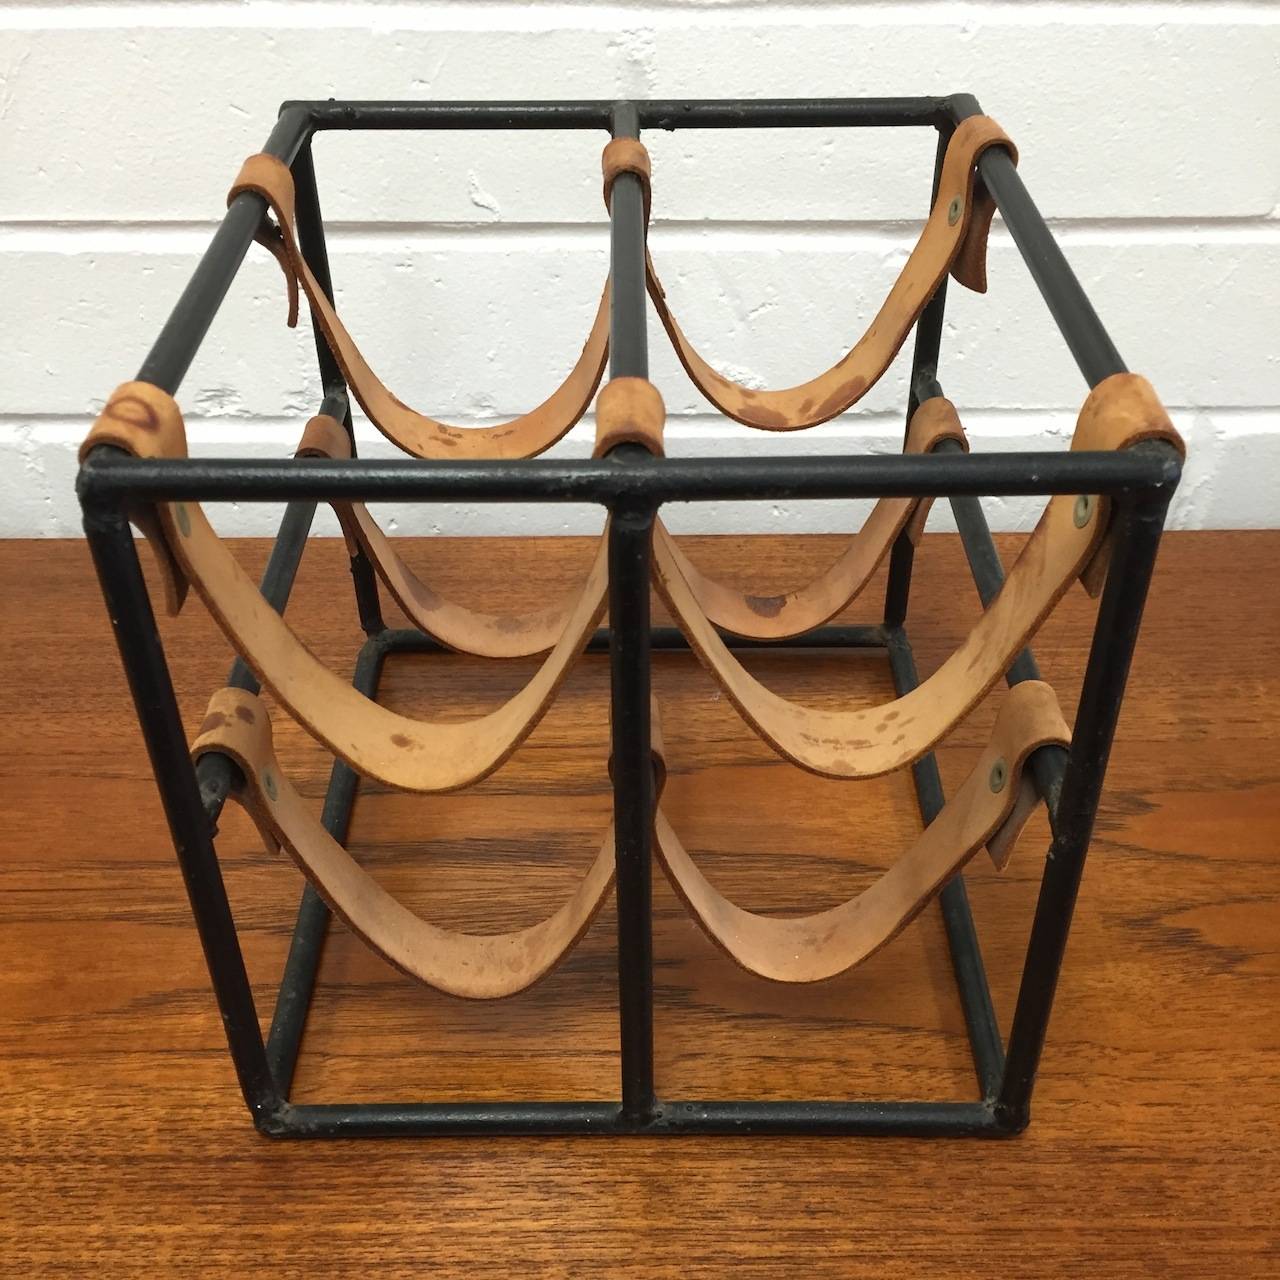 Vintage iron and leather four bottle wine rack by Arthur Umanoff. Good original condition with an ape appropriate patina to the leather as pictured.